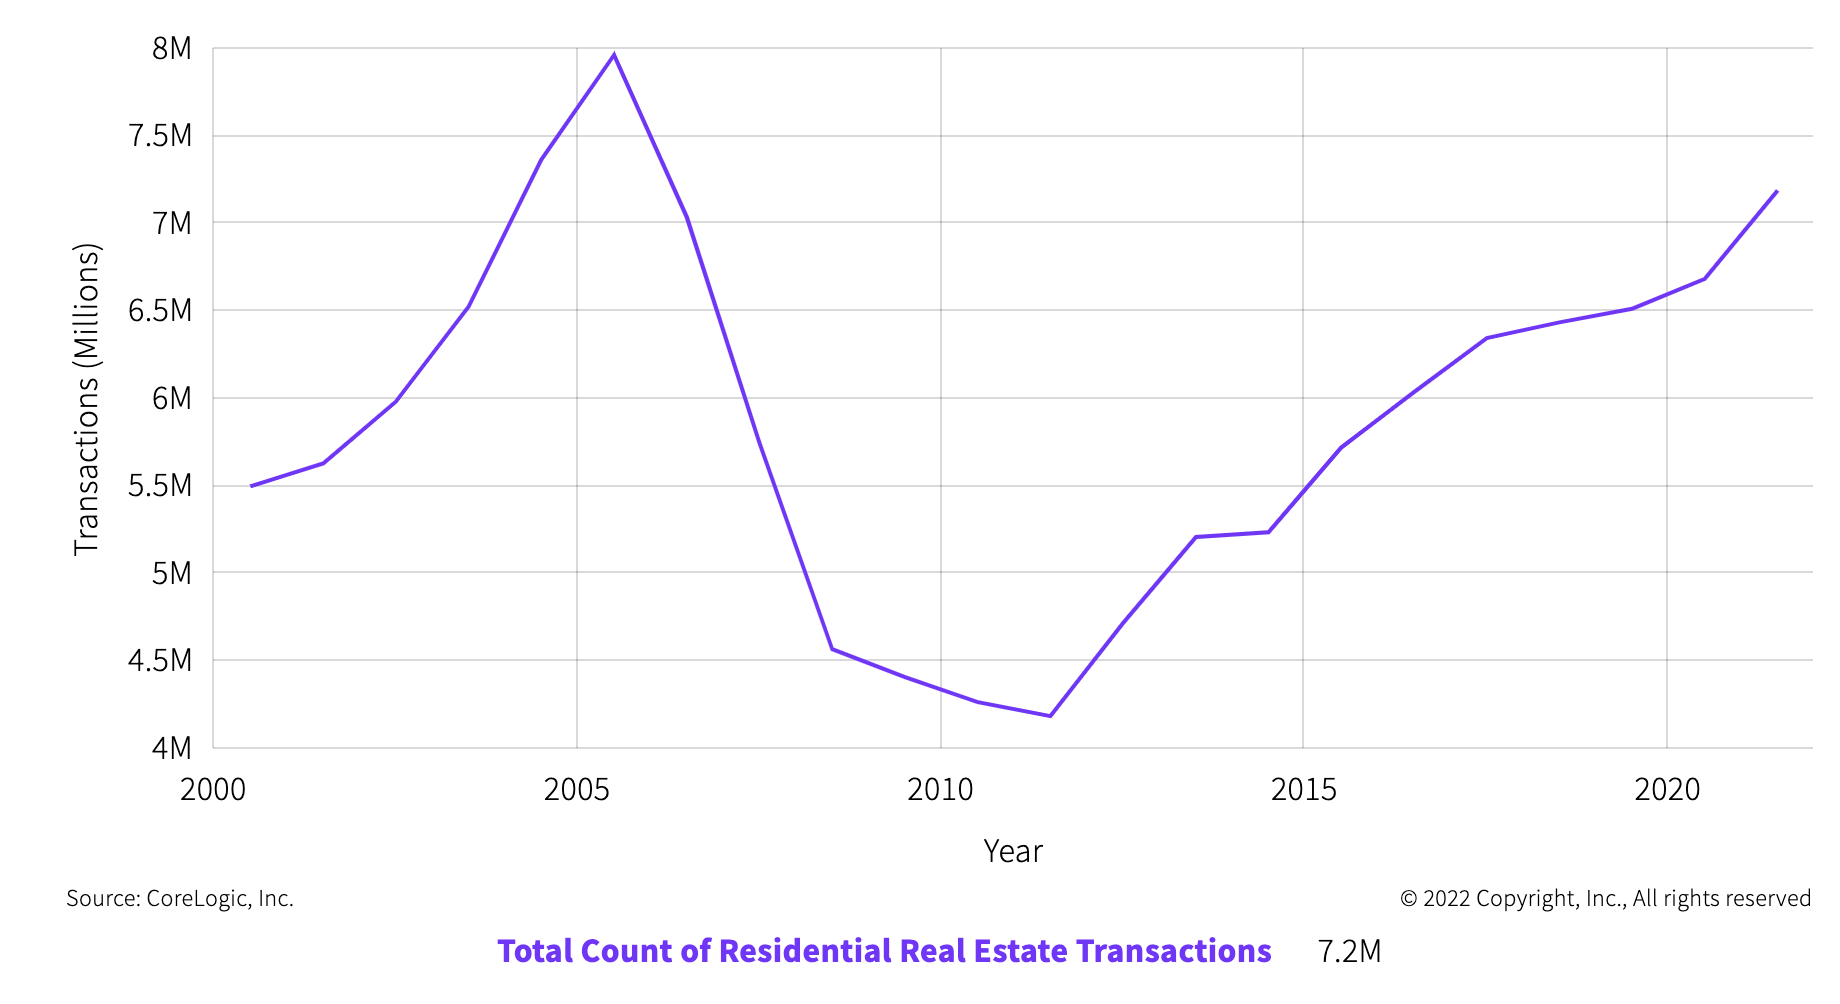 Source: https://www.corelogic.com/intelligence/2021-a-record-breaking-year-for-real-estate-transactions/